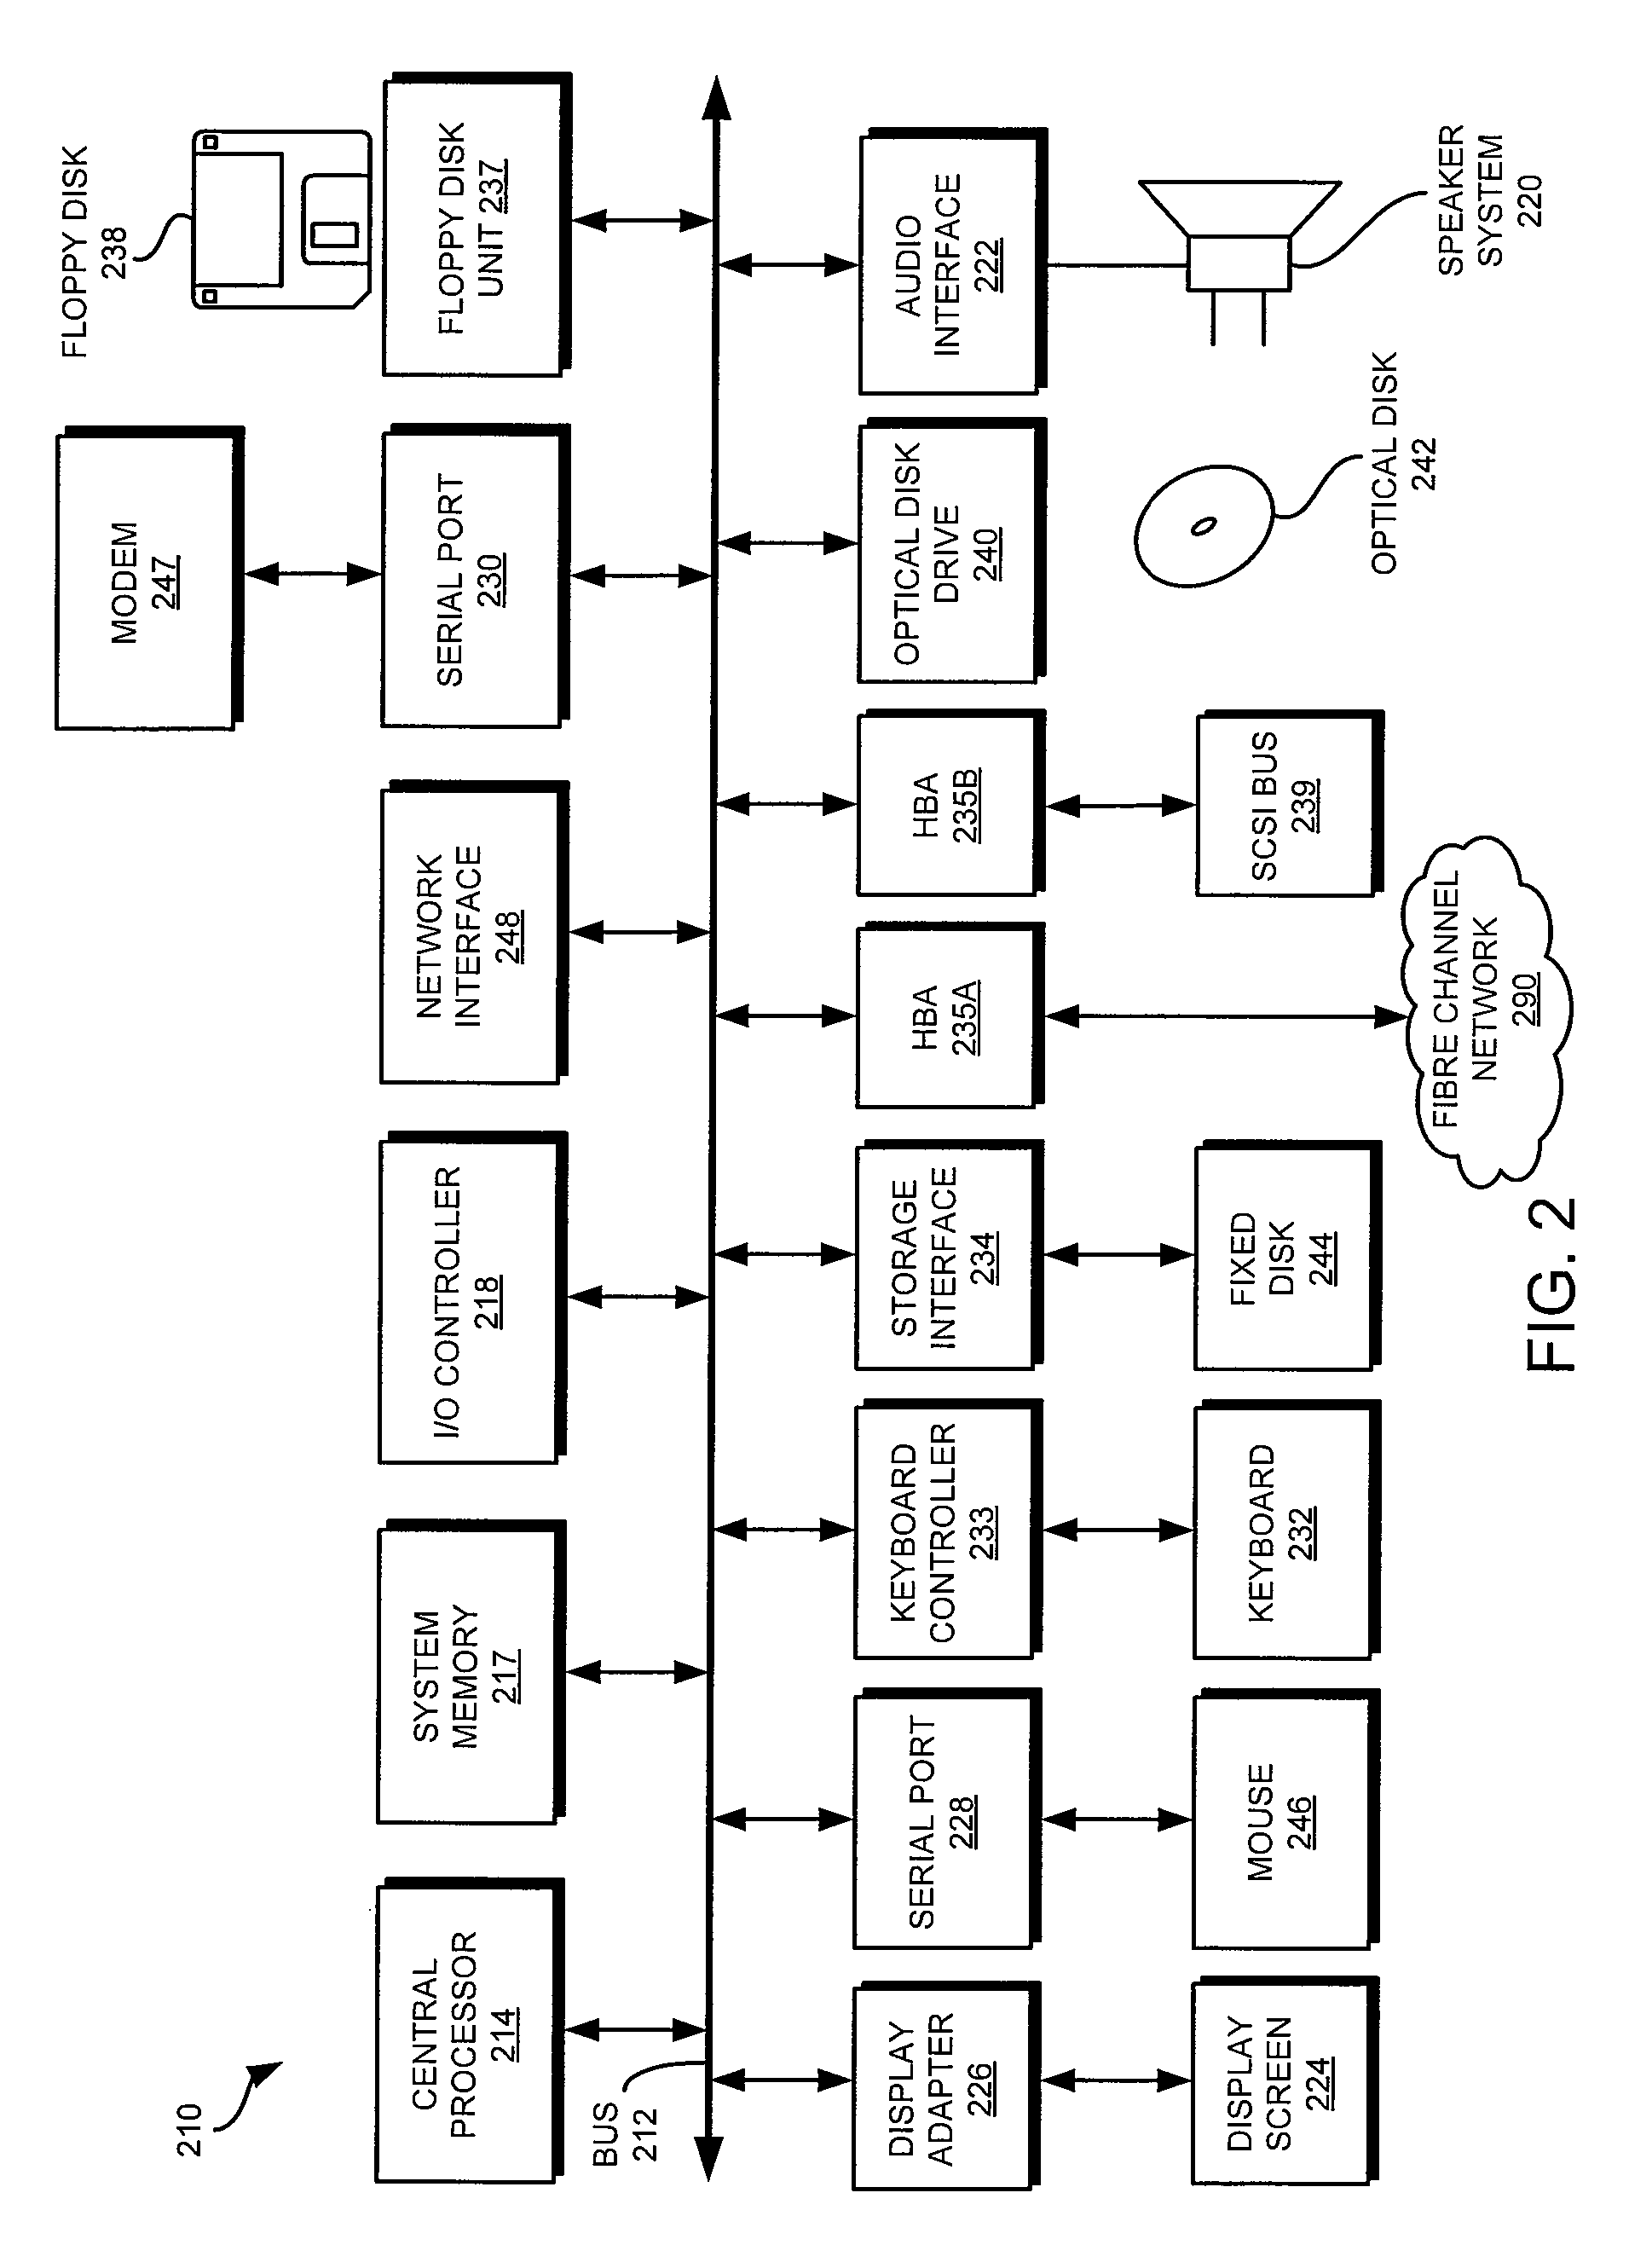 Method and apparatus for automatically excluding false positives from detection as malware